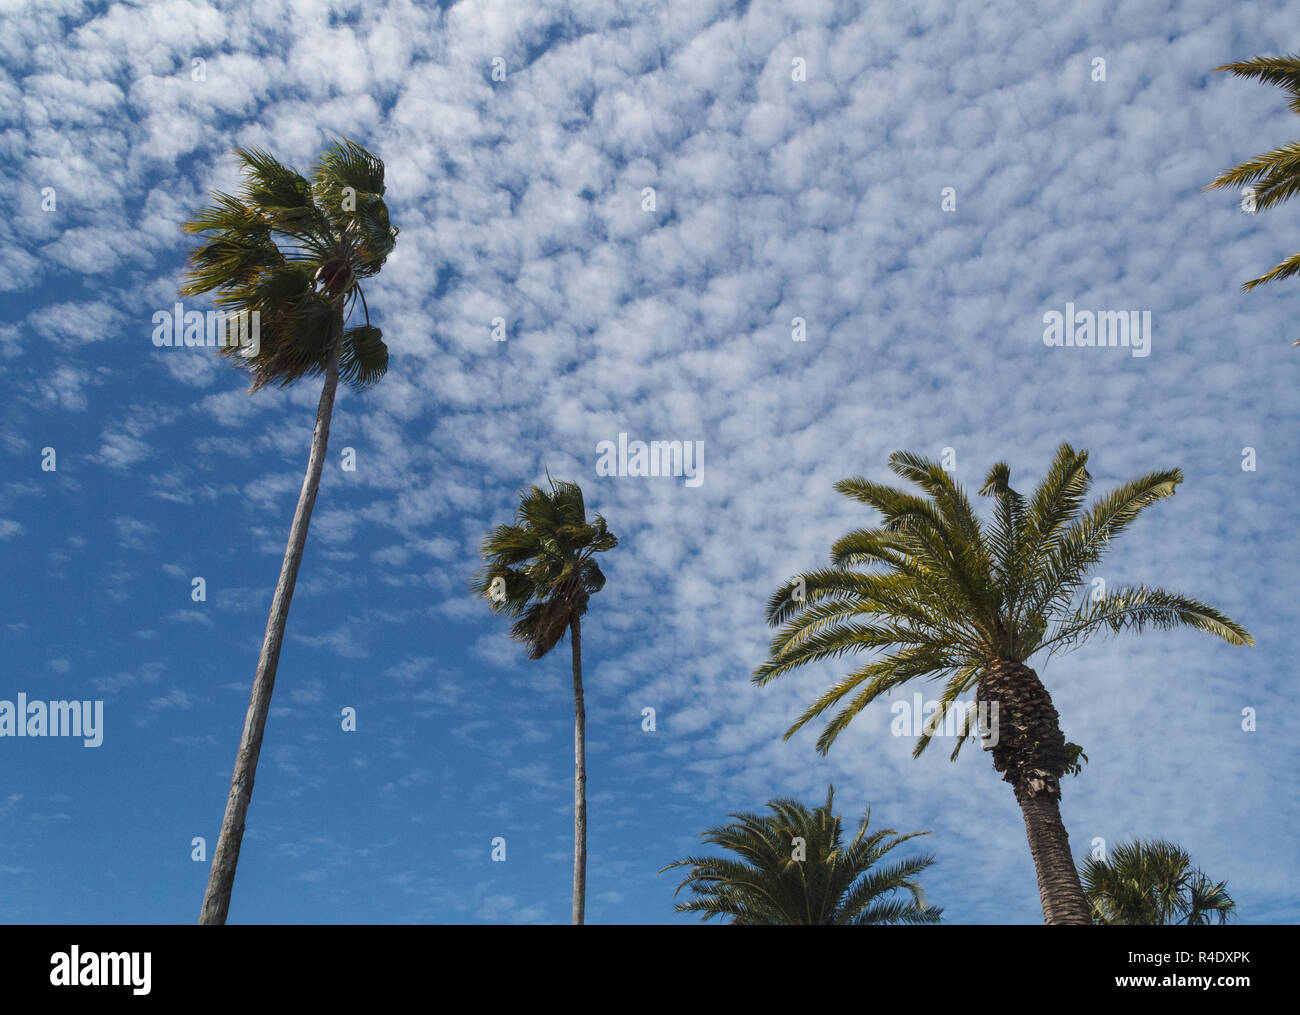 Large formation of cirrus clouds over towering palm trees, Florida, USA Stock Photo